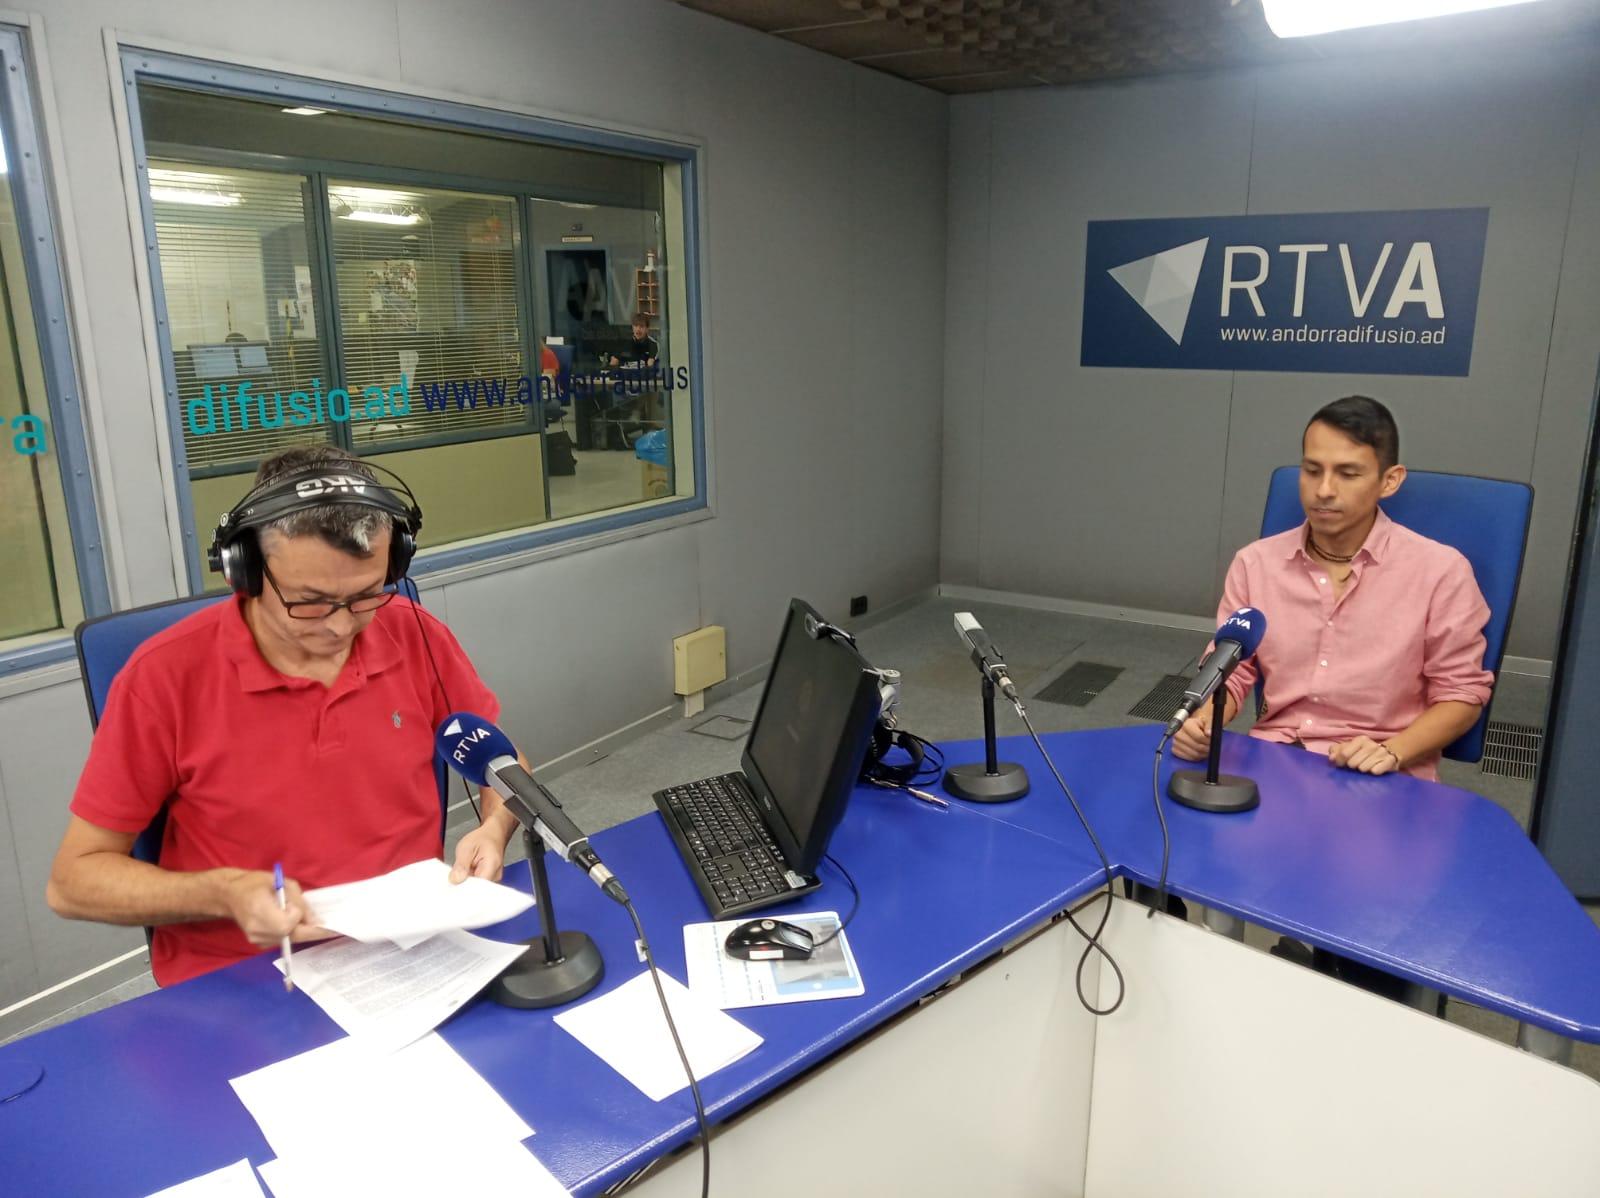 Rolando Edison Vásquez, the resident of Andorra most interviewed by the media